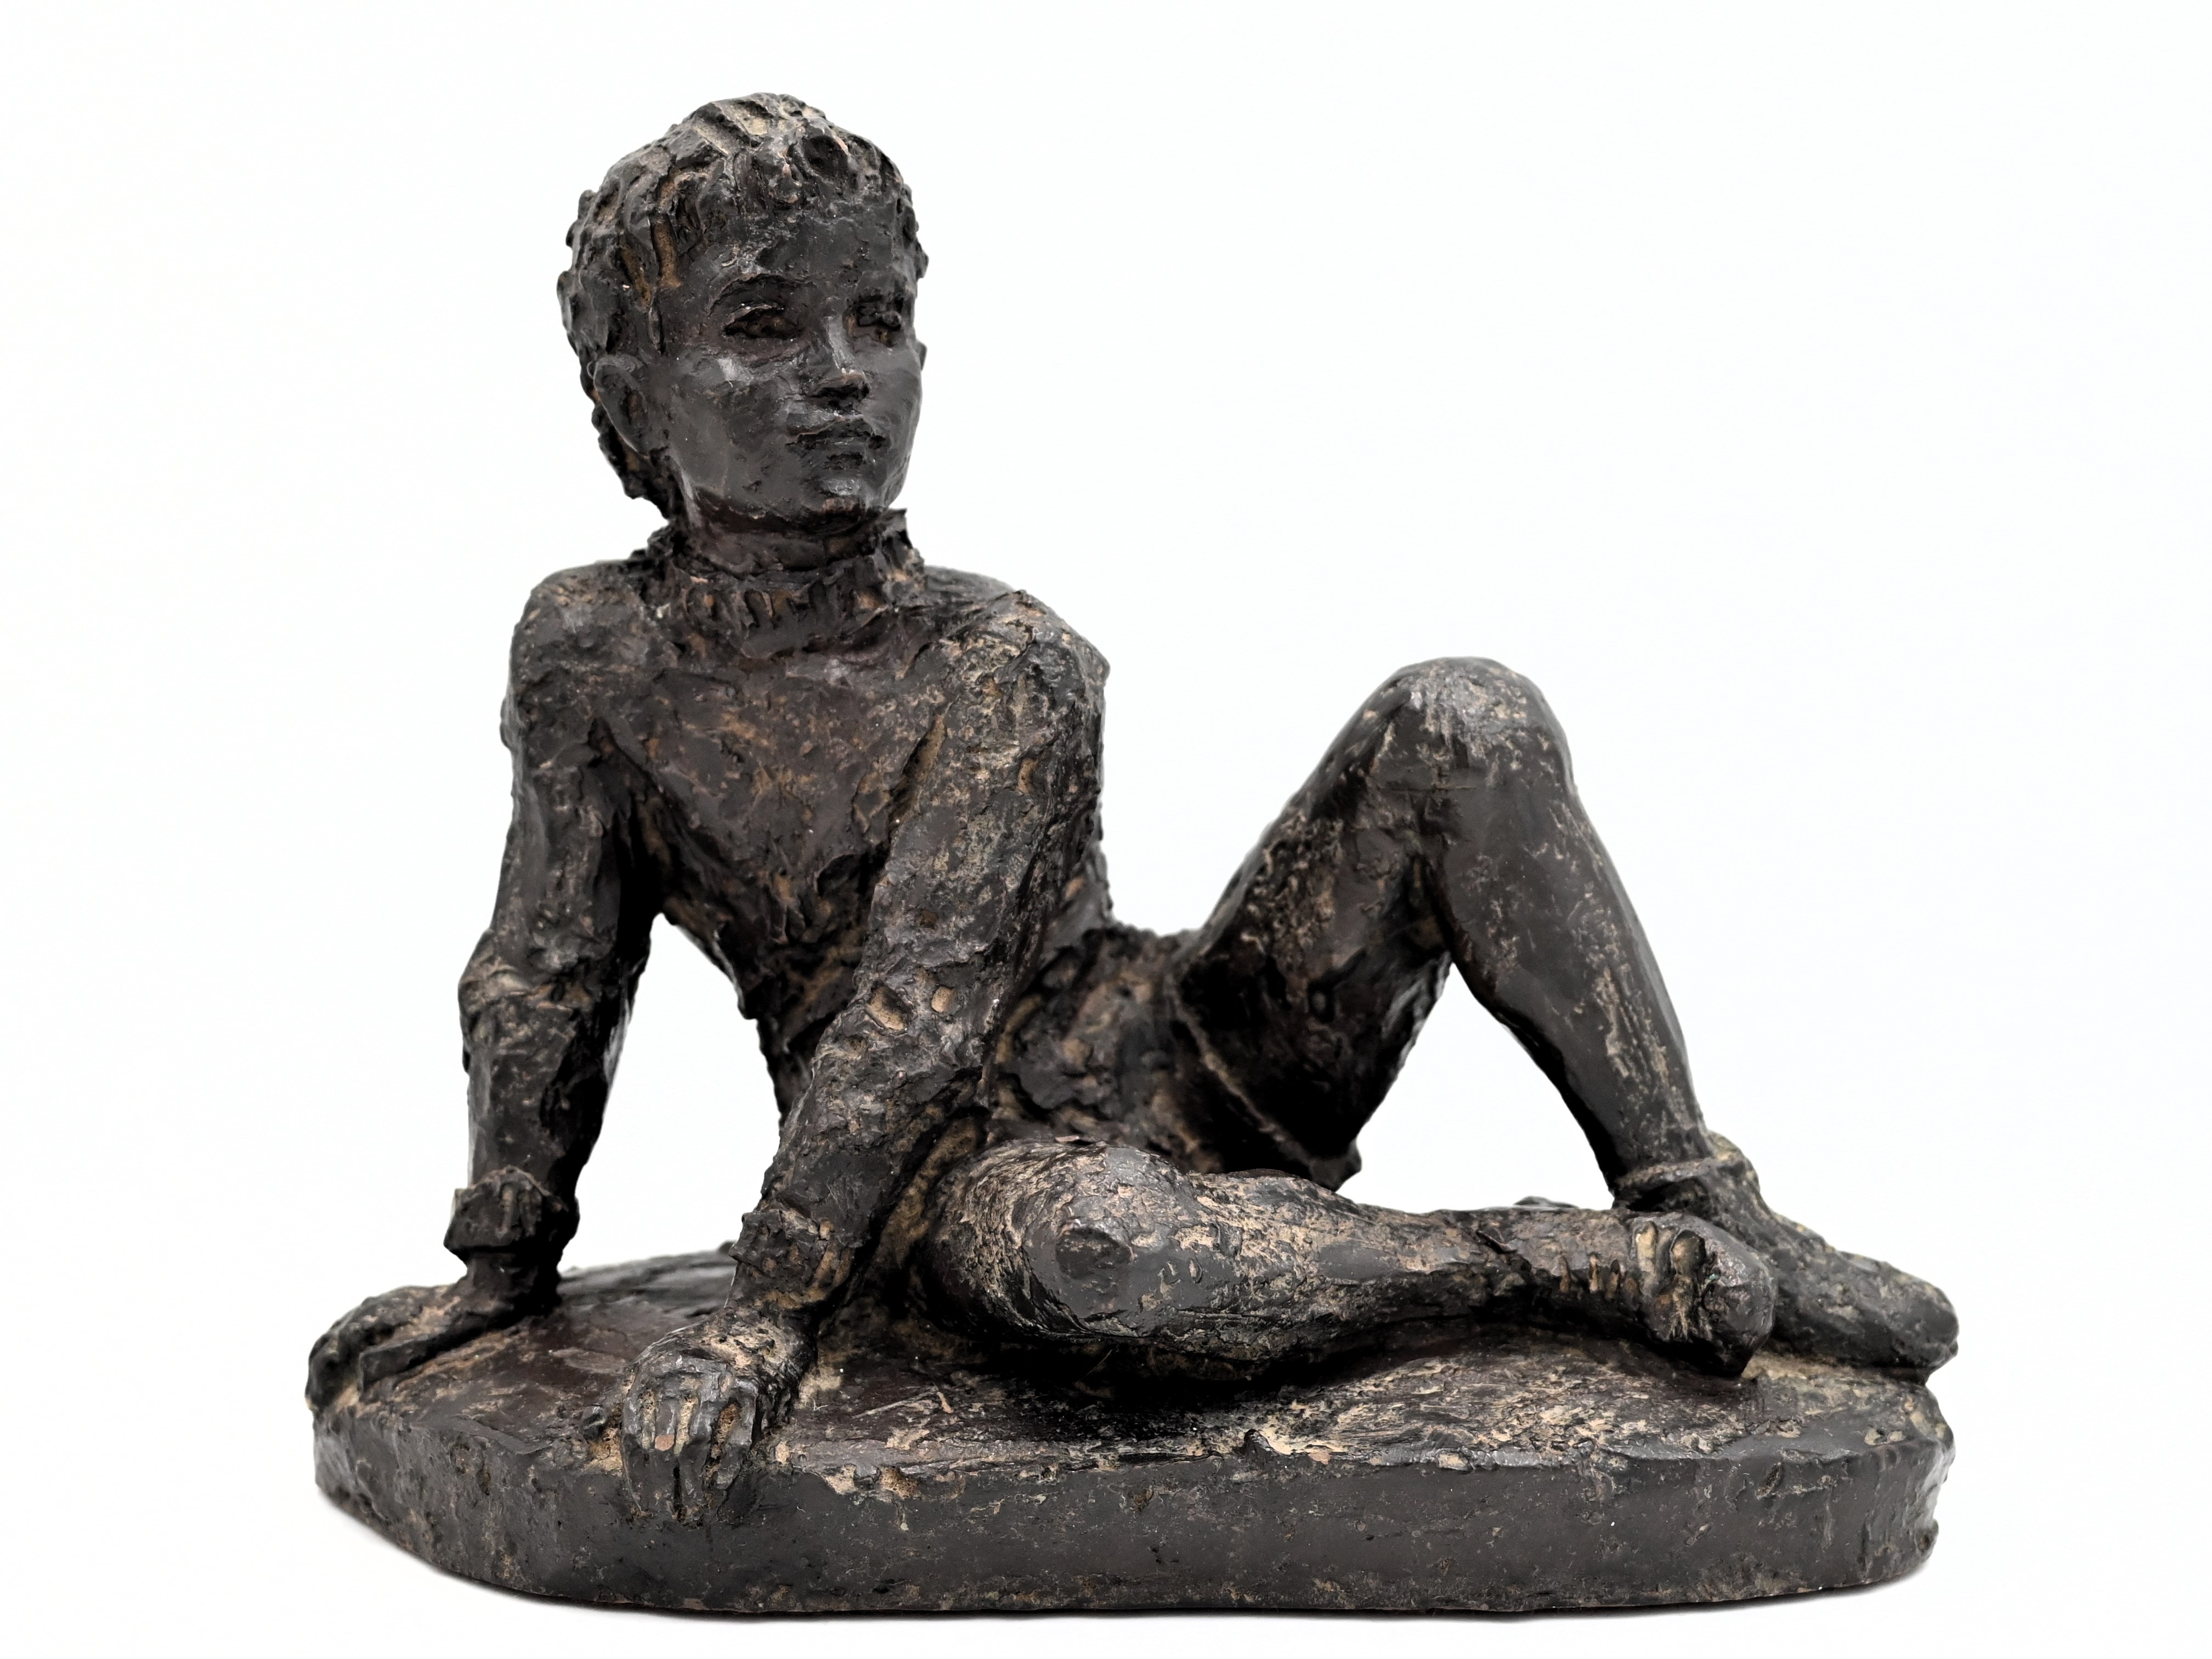 Karin Jonzen RBA FRBS, British 1914-1998 - Boy sitting; bronze resin, signed with initials on - Image 2 of 2